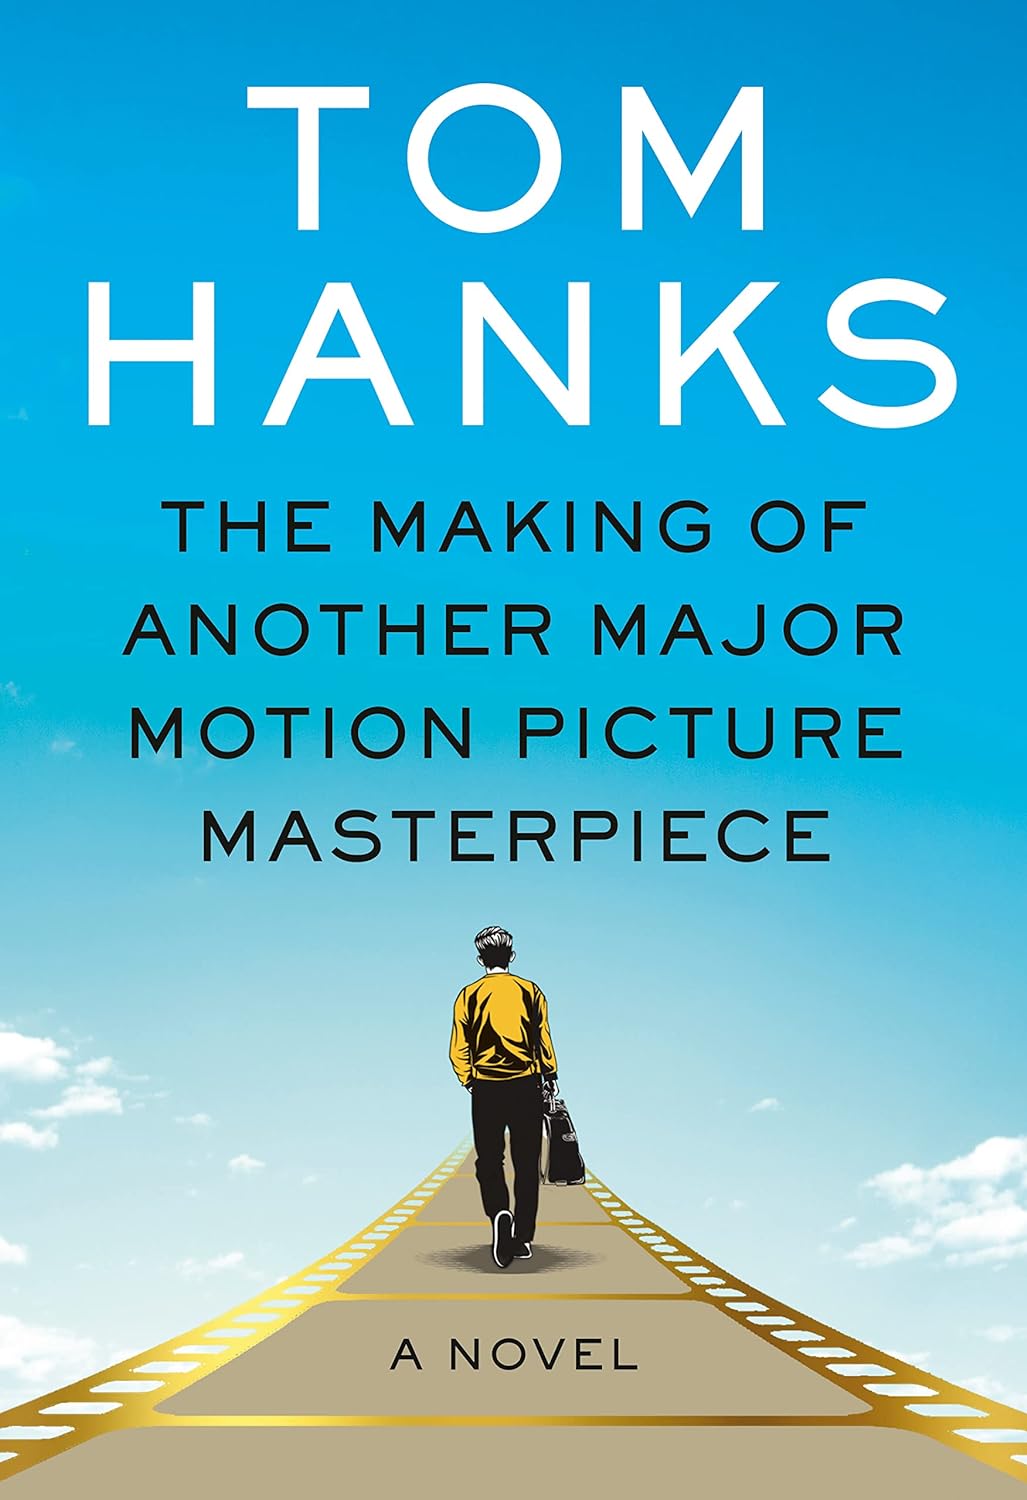 Cover of "The Making of Another Major Motion Picture Masterpiece" by Tom Hanks